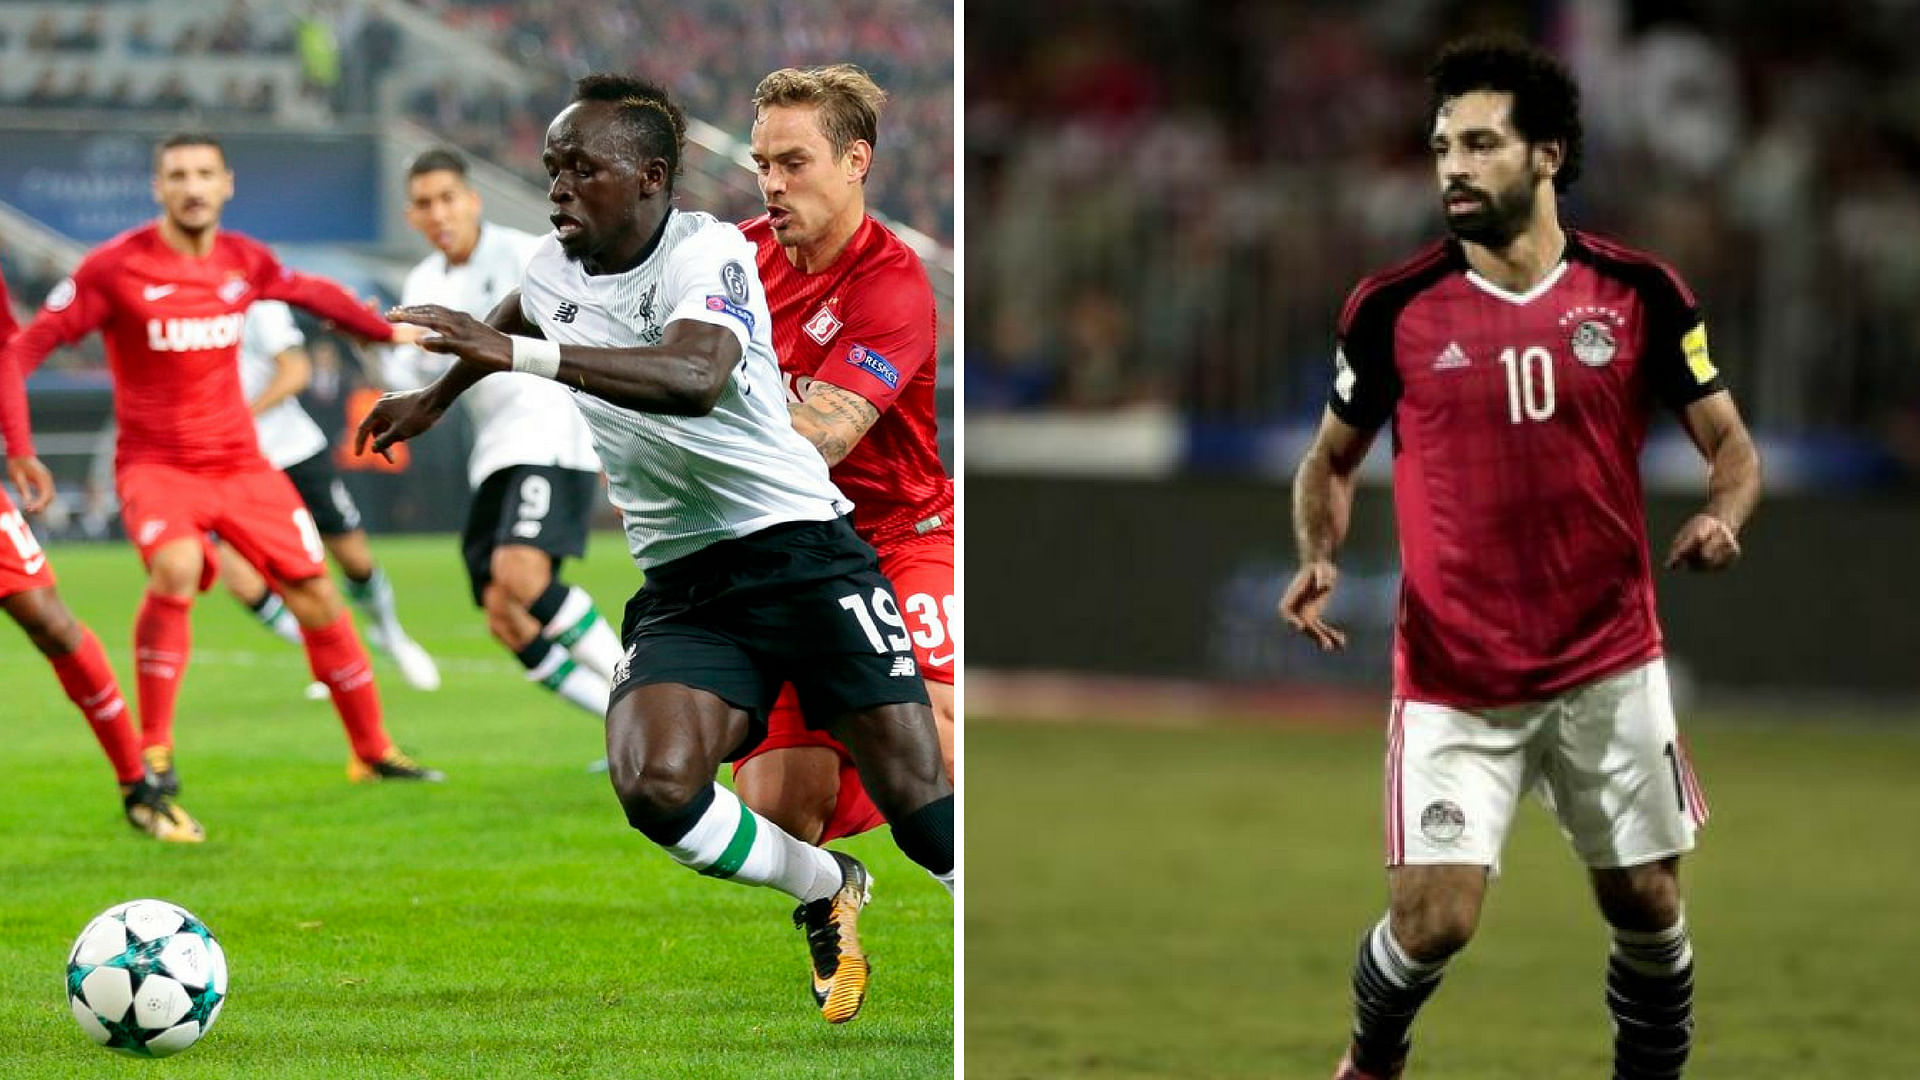 Both Sadio Mane of Senegal and Mohamed Salah of Egypt are the stars of their teams – and Muslims.